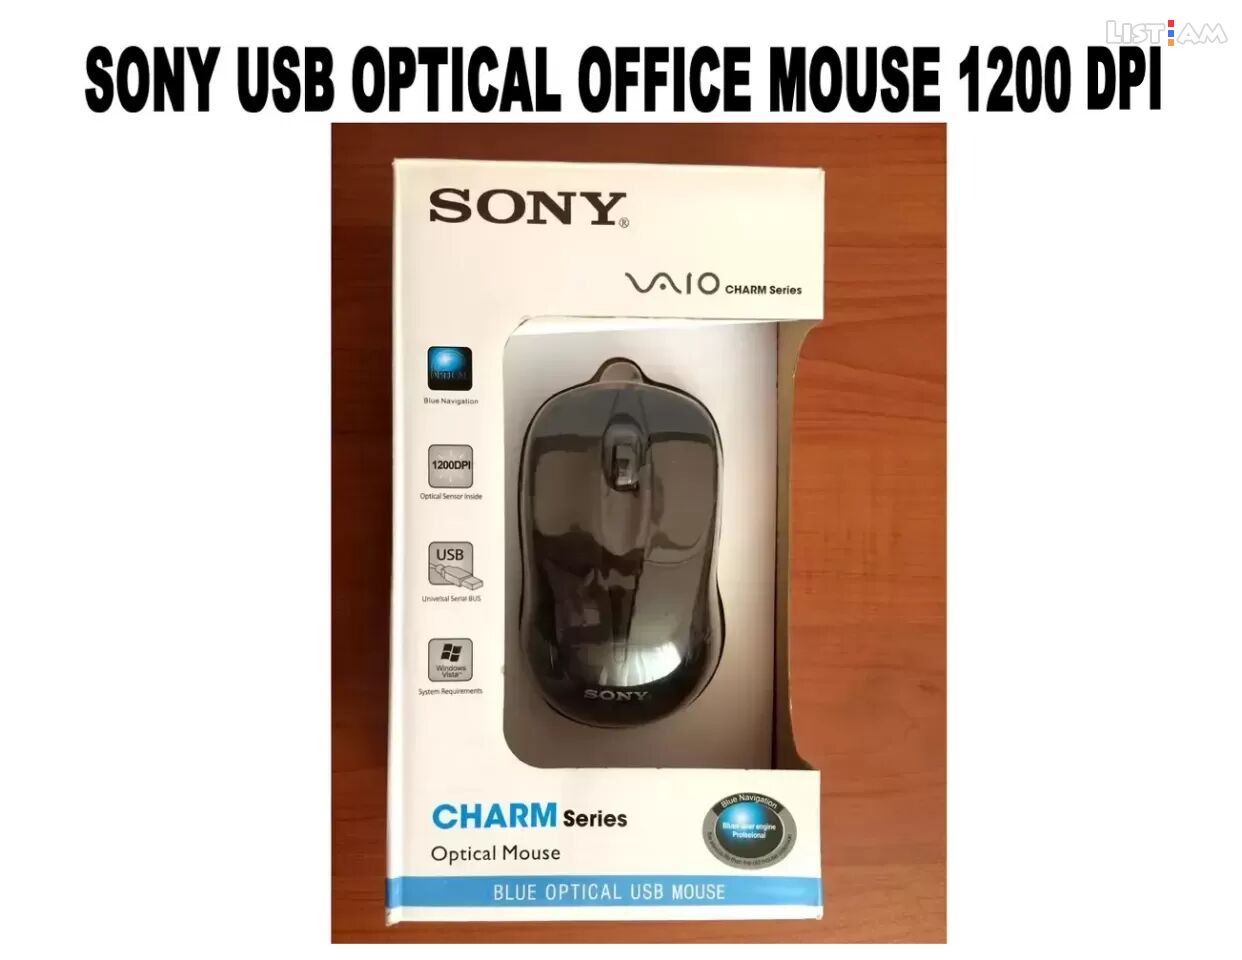 Optic Office Mouse